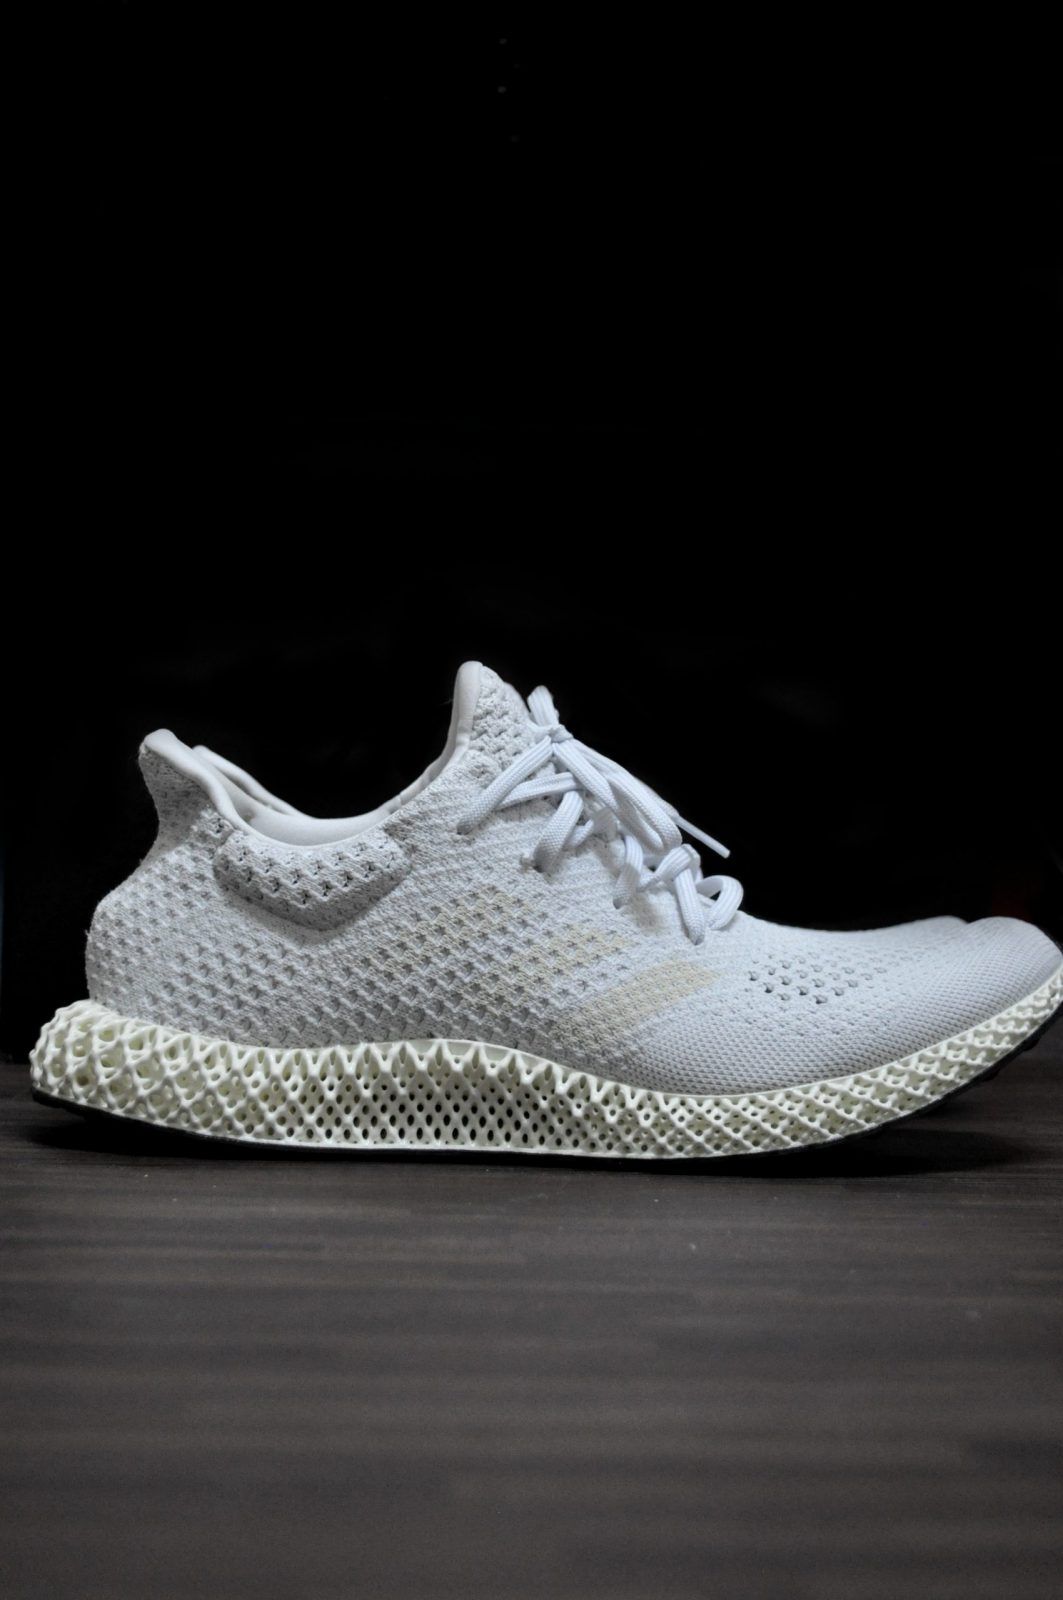 Tropezón James Dyson Guión WOMFT? Review: Adidas Futurecraft 4D "Chalk White" - WOMFT? - What's On My  Feet Today? - Blog